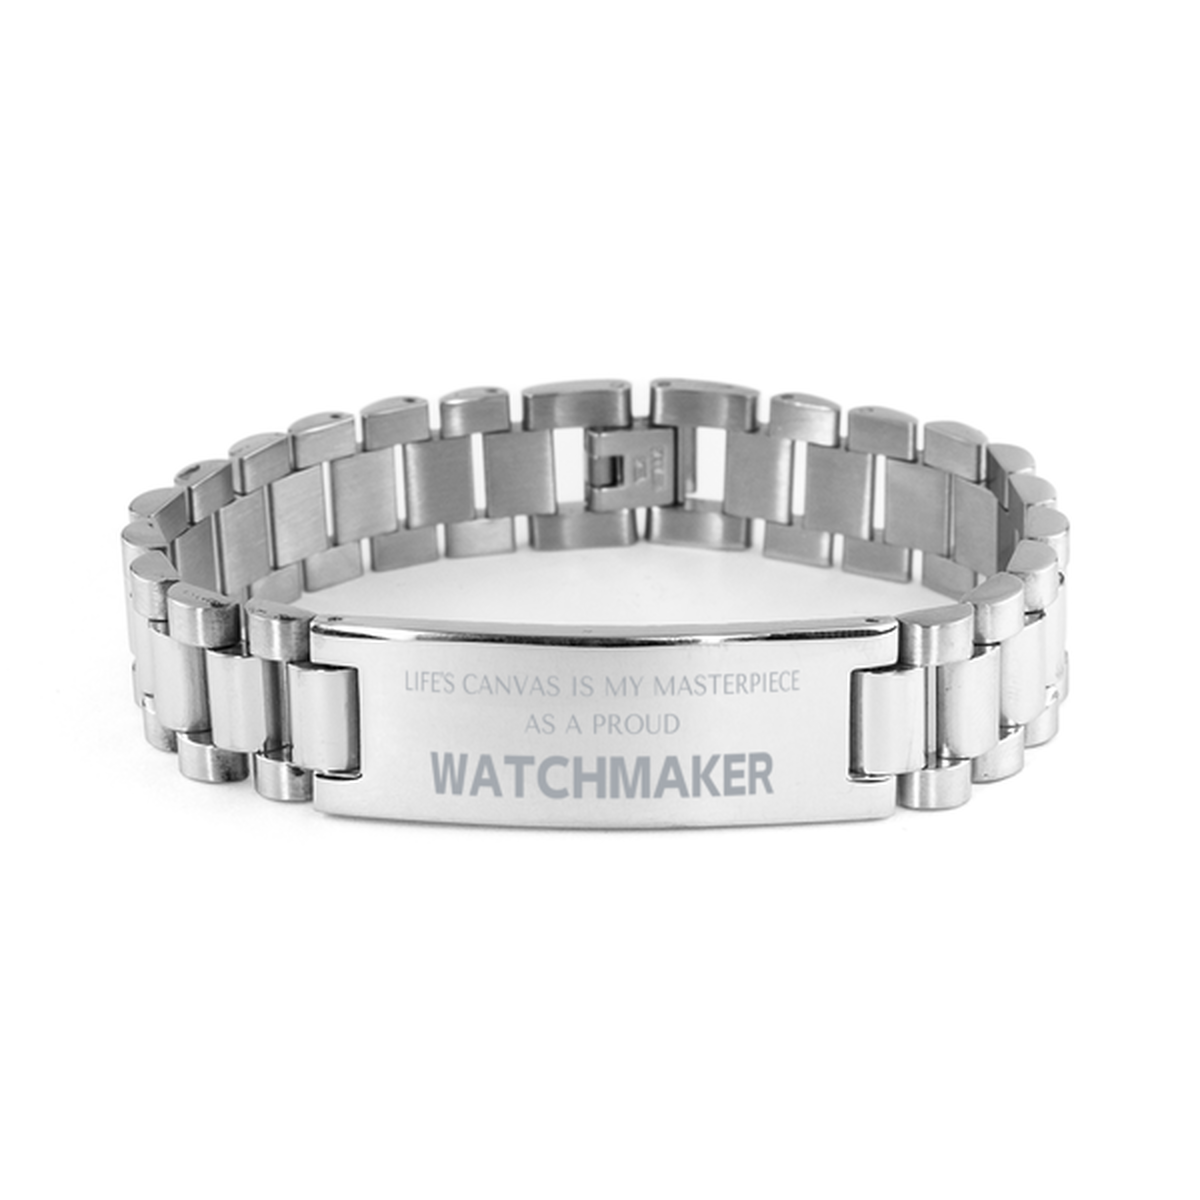 Proud Watchmaker Gifts, Life's canvas is my masterpiece, Epic Birthday Christmas Unique Ladder Stainless Steel Bracelet For Watchmaker, Coworkers, Men, Women, Friends